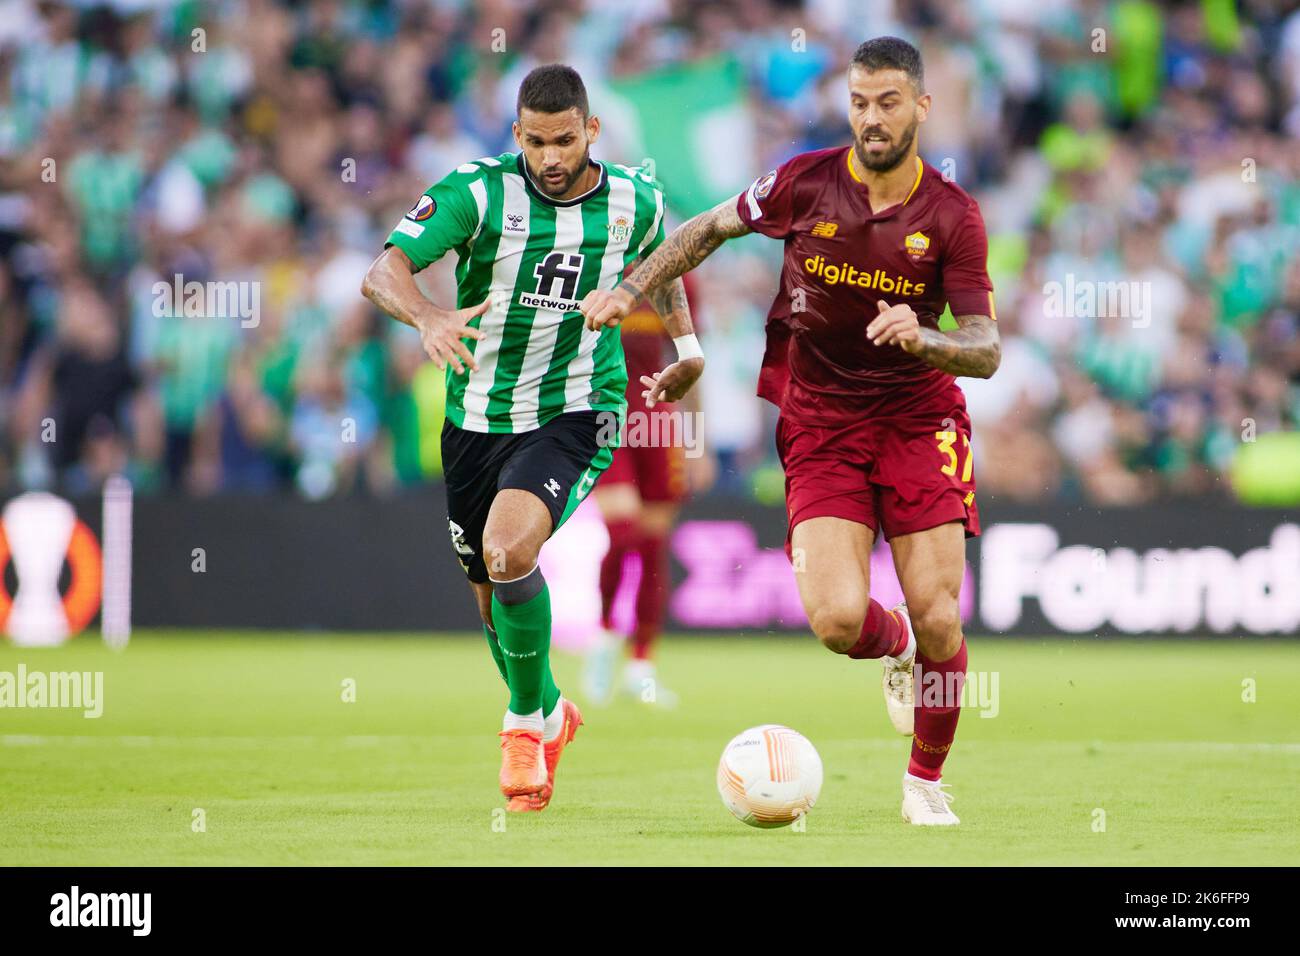 Sevilla, Spain - October 13, 2022, William Jose of Real Betis and Leonardo Spinazzola of AS Roma in action during the UEFA Europa League, Group C, match between Real Betis and AS Roma at Benito Villamarin Stadium on October 13, 2022 in Sevilla, Spain. - Photo: Joaquin Corchero/DPPI/LiveMedia Stock Photo